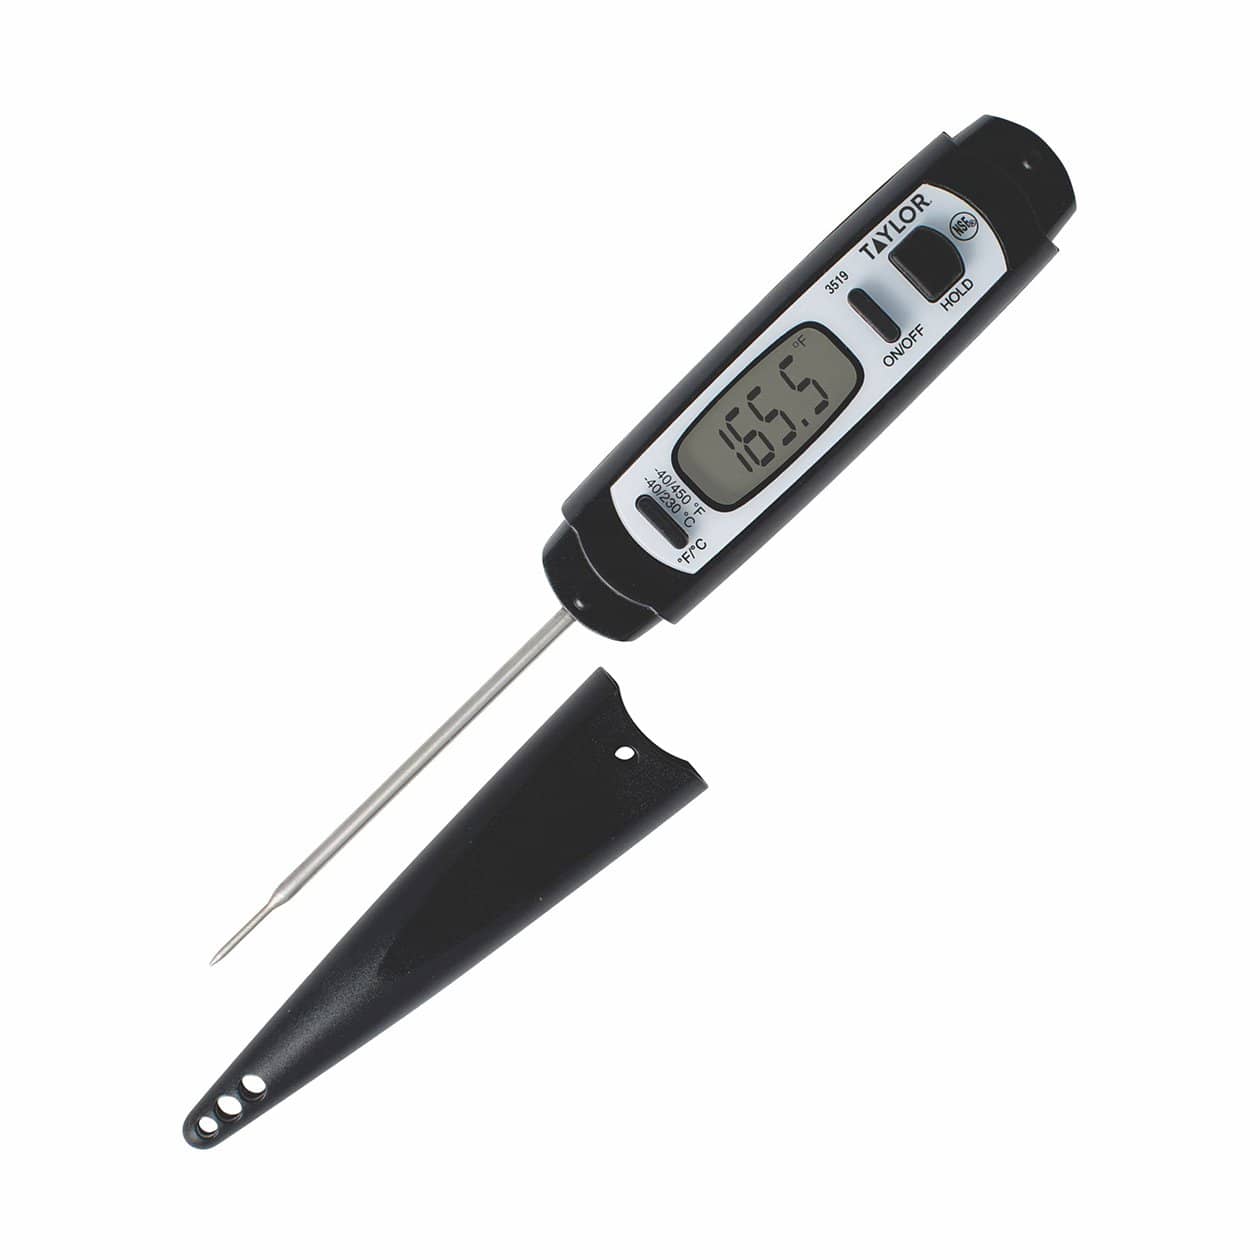 Taylor 3516 Digital Instant Read Thermometer